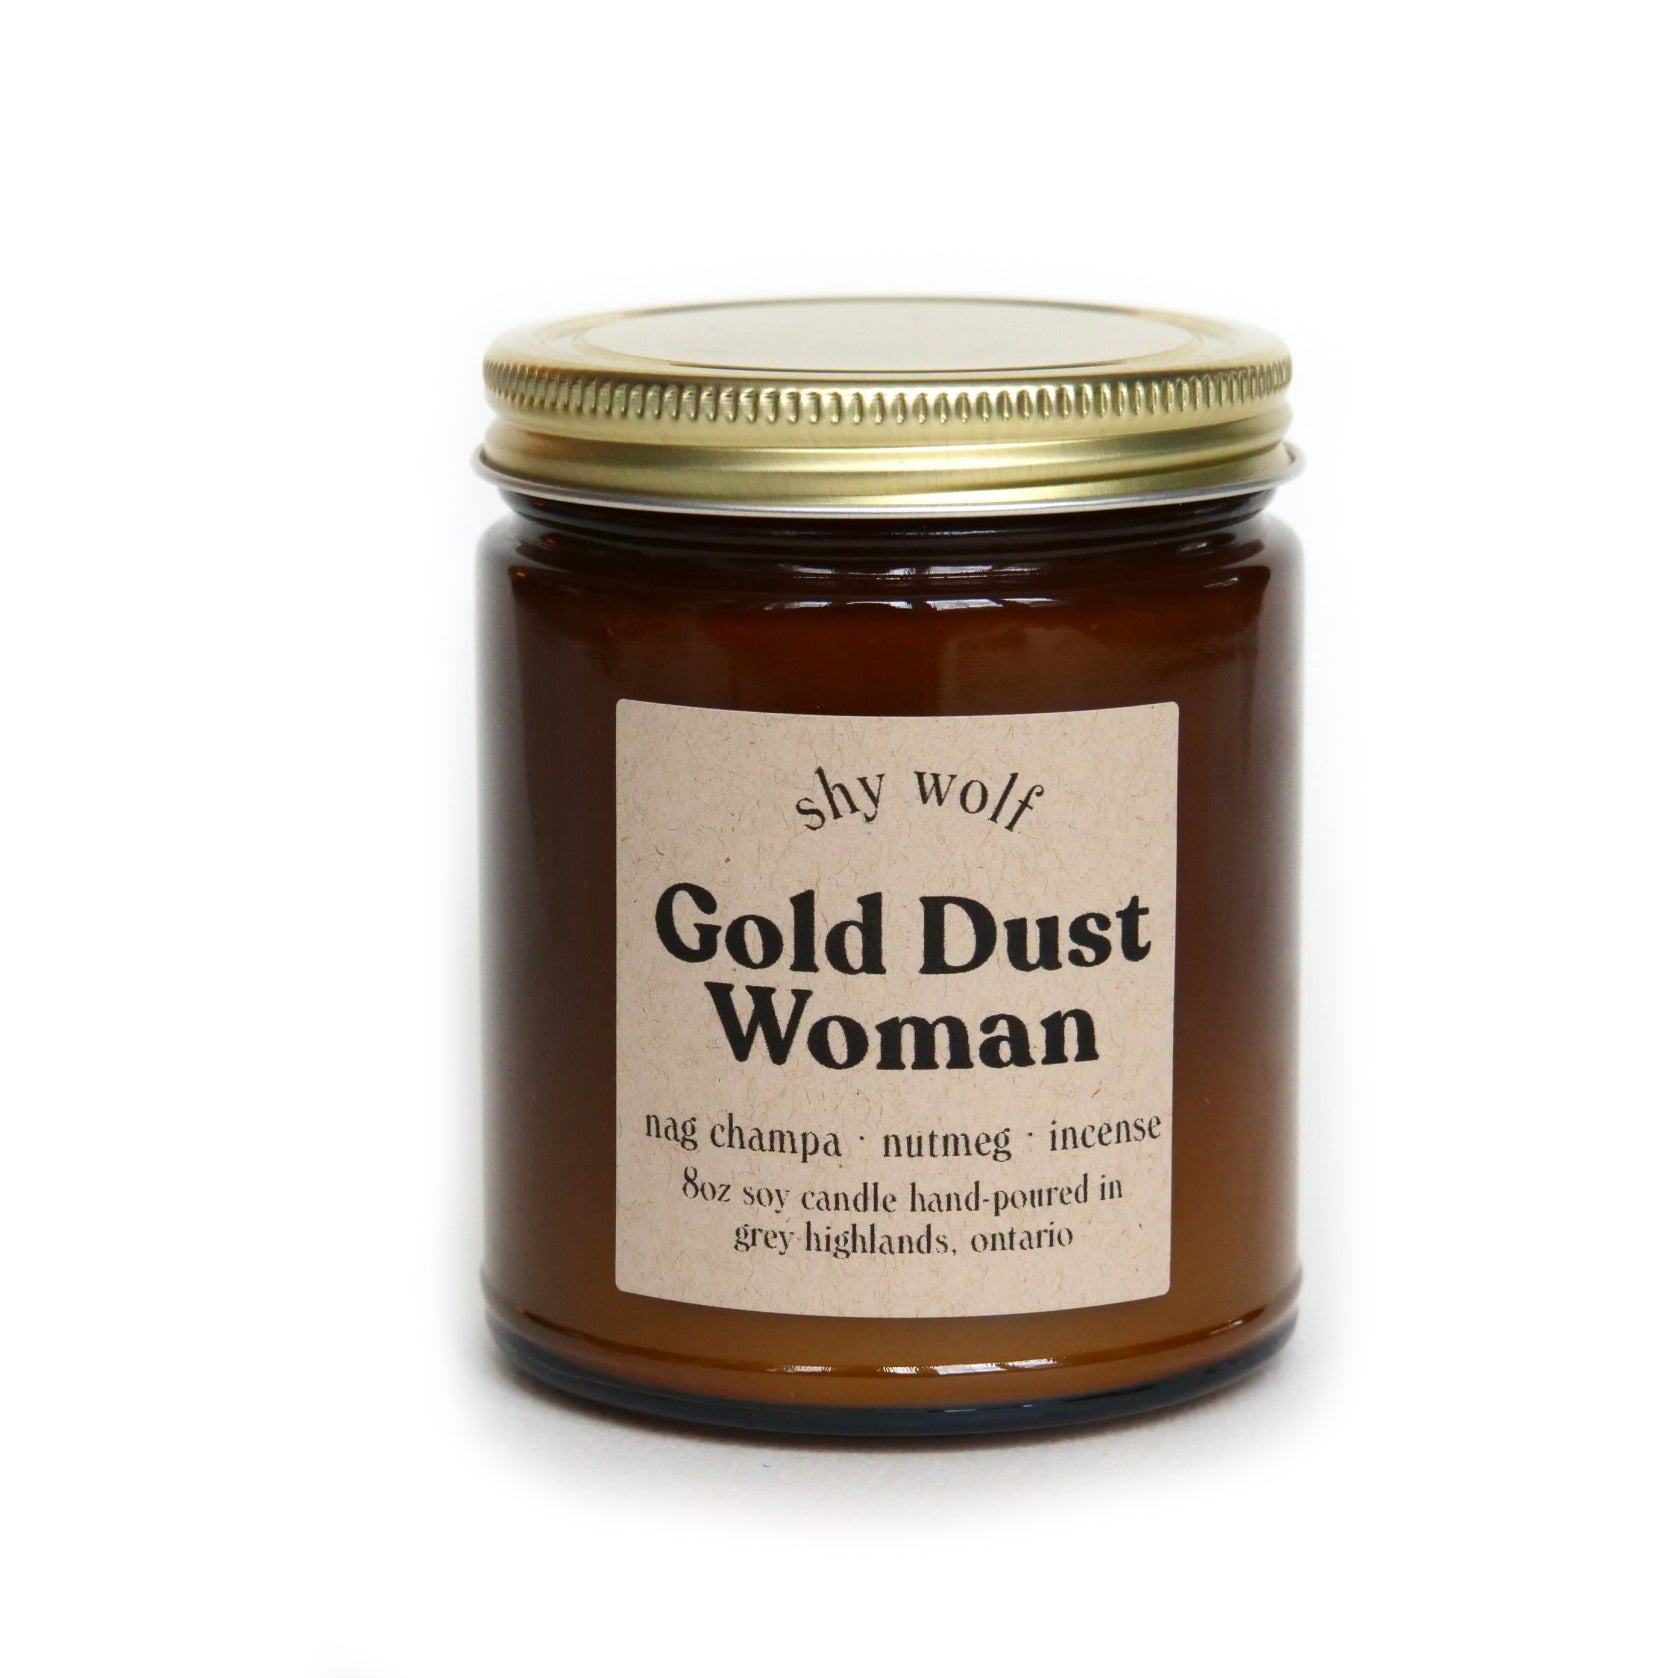 All natural hand-poured "Gold Dust Woman" scented soy candle made in Canada by Shy Wolf candles.